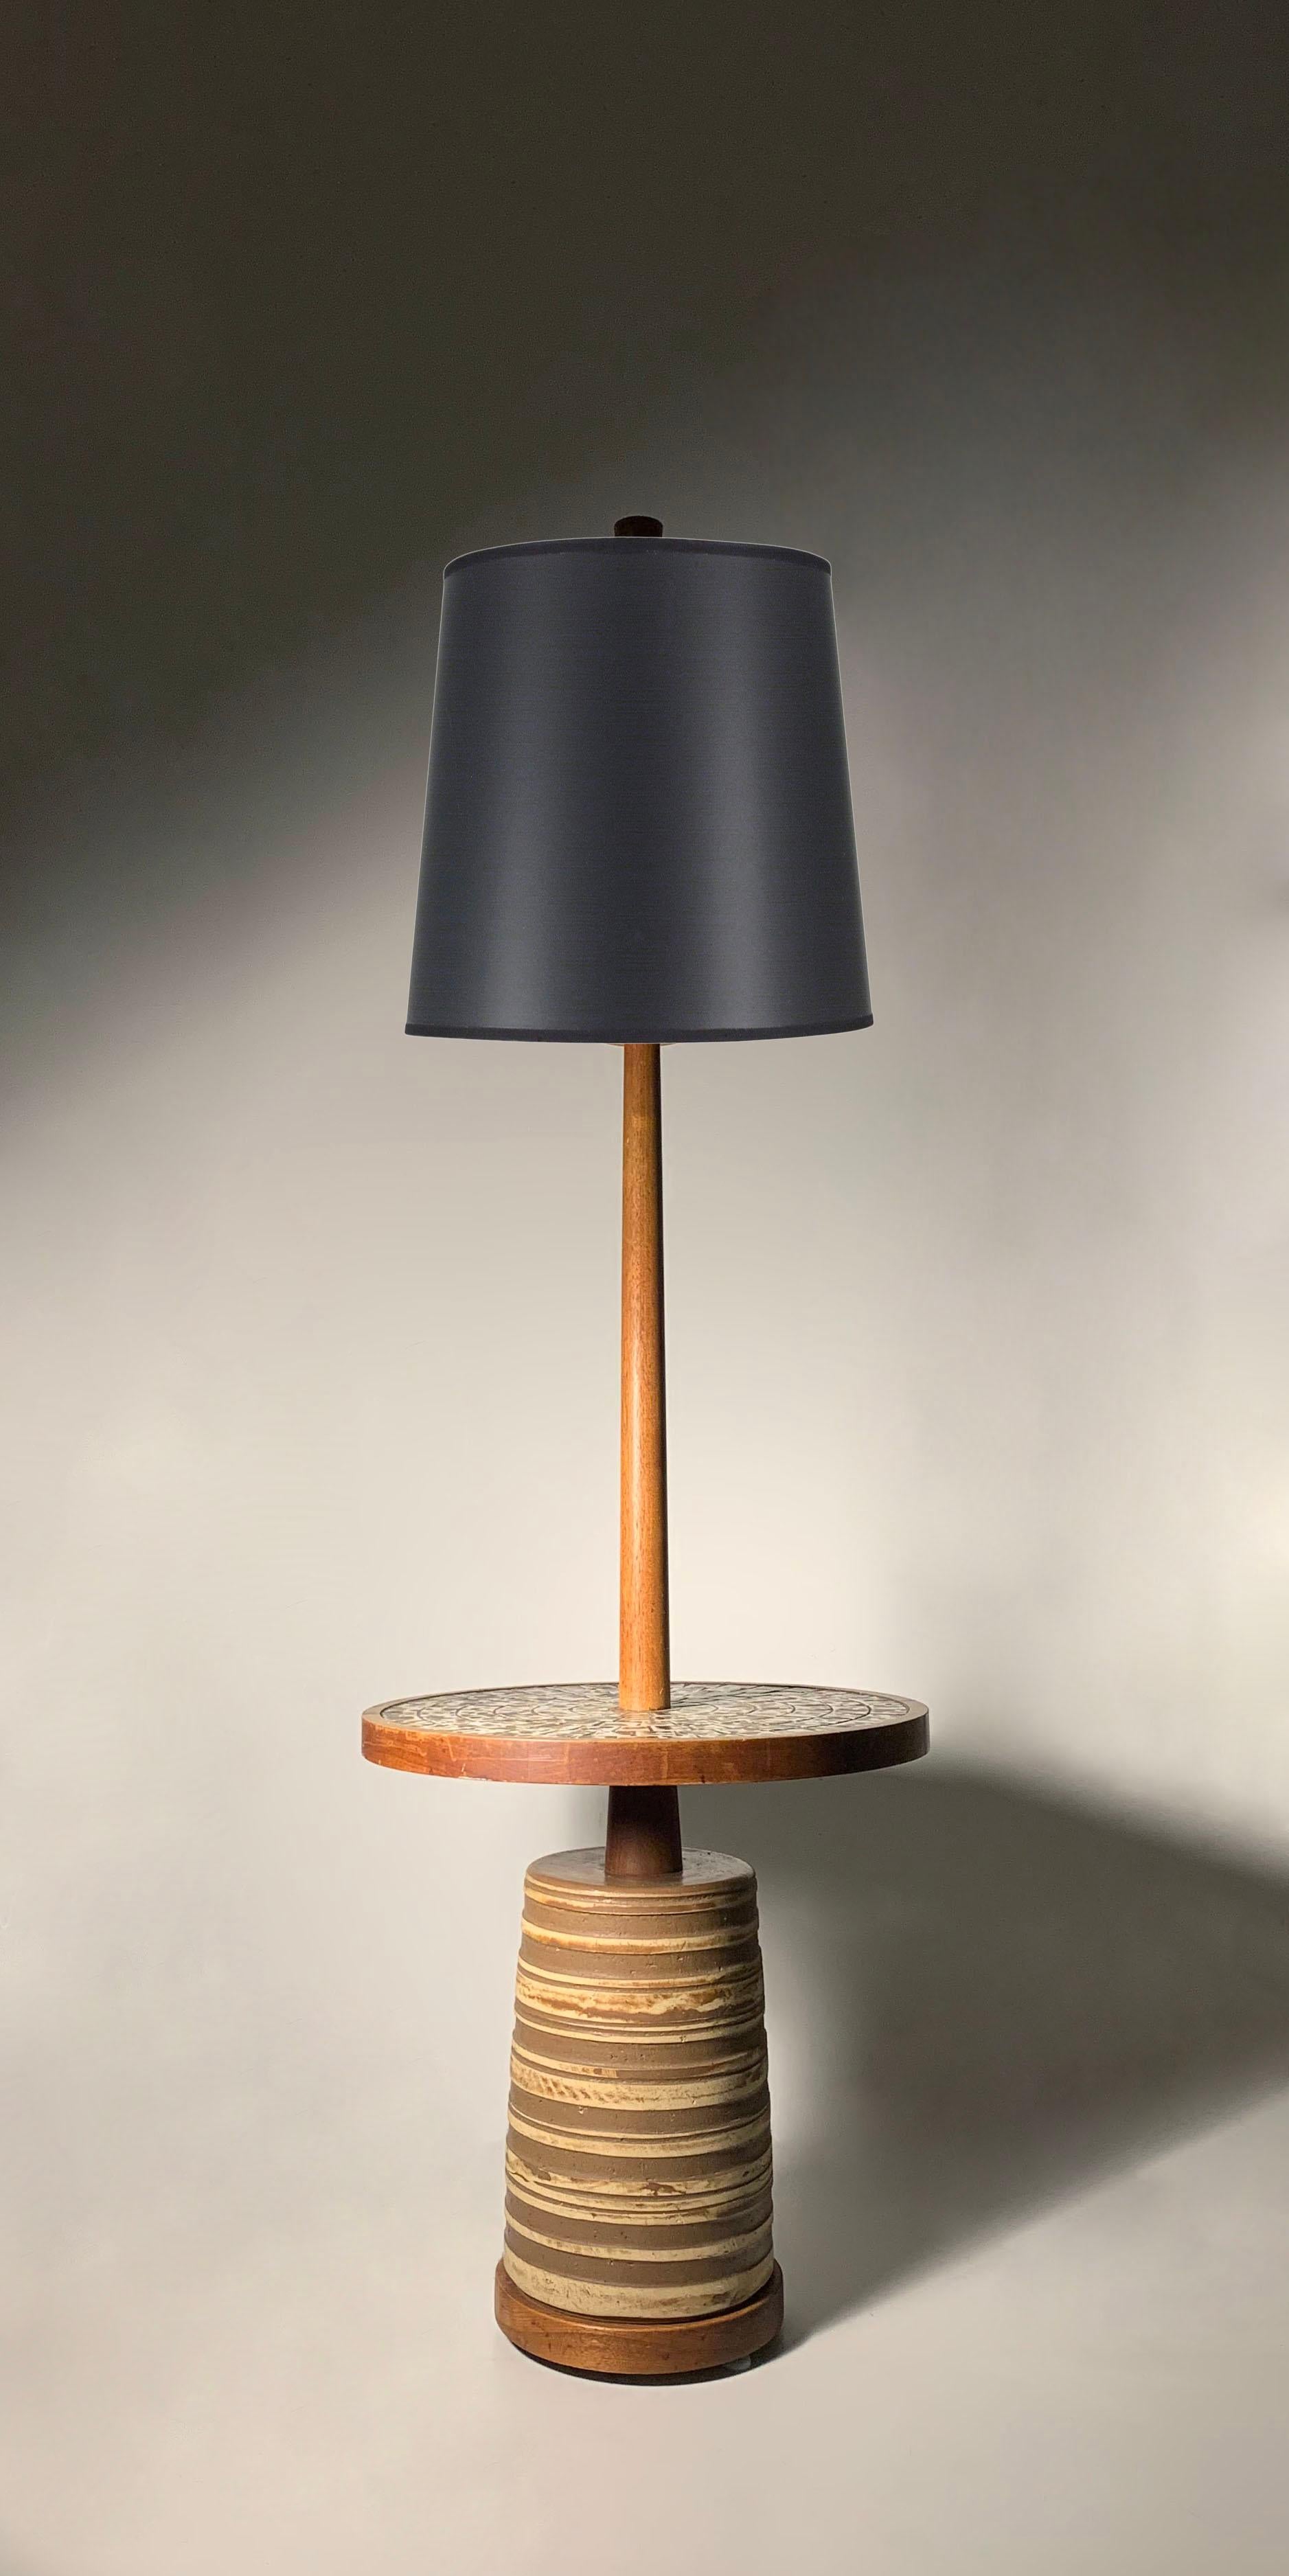 Gordon & Jane Martz Ceramic & Walnut Floor Lamp with Tabletop. 

Tabletop can be removed if desired to have the floor lamp without tabletop.  Please confirm if you would like to have a photograph of it in this manner.  Will add a photo of a